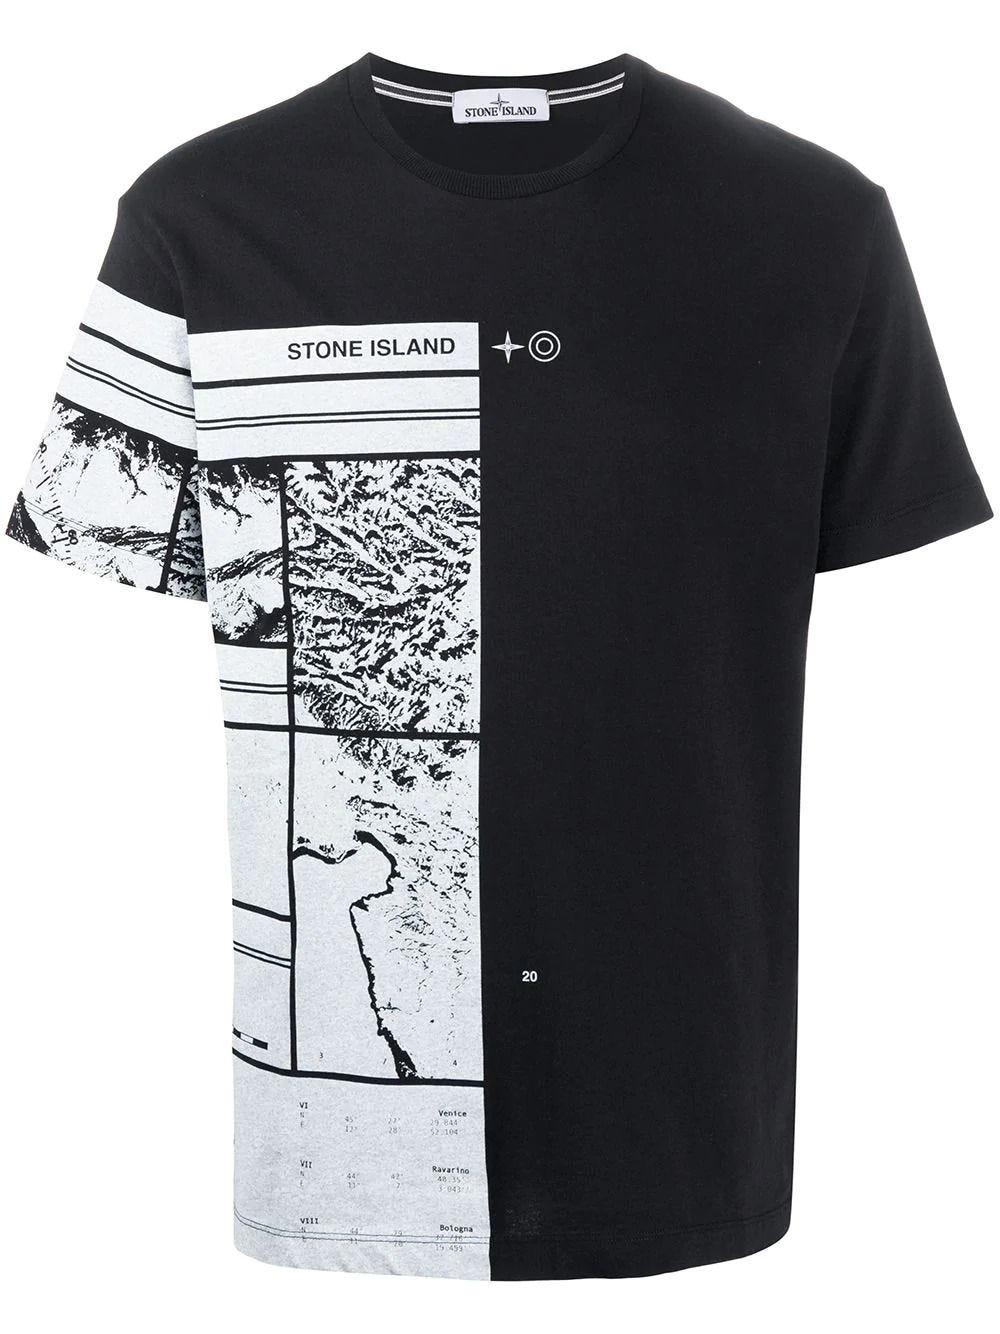 Stone Island Cotton Mural Part 3 T-shirt in Black for Men | Lyst